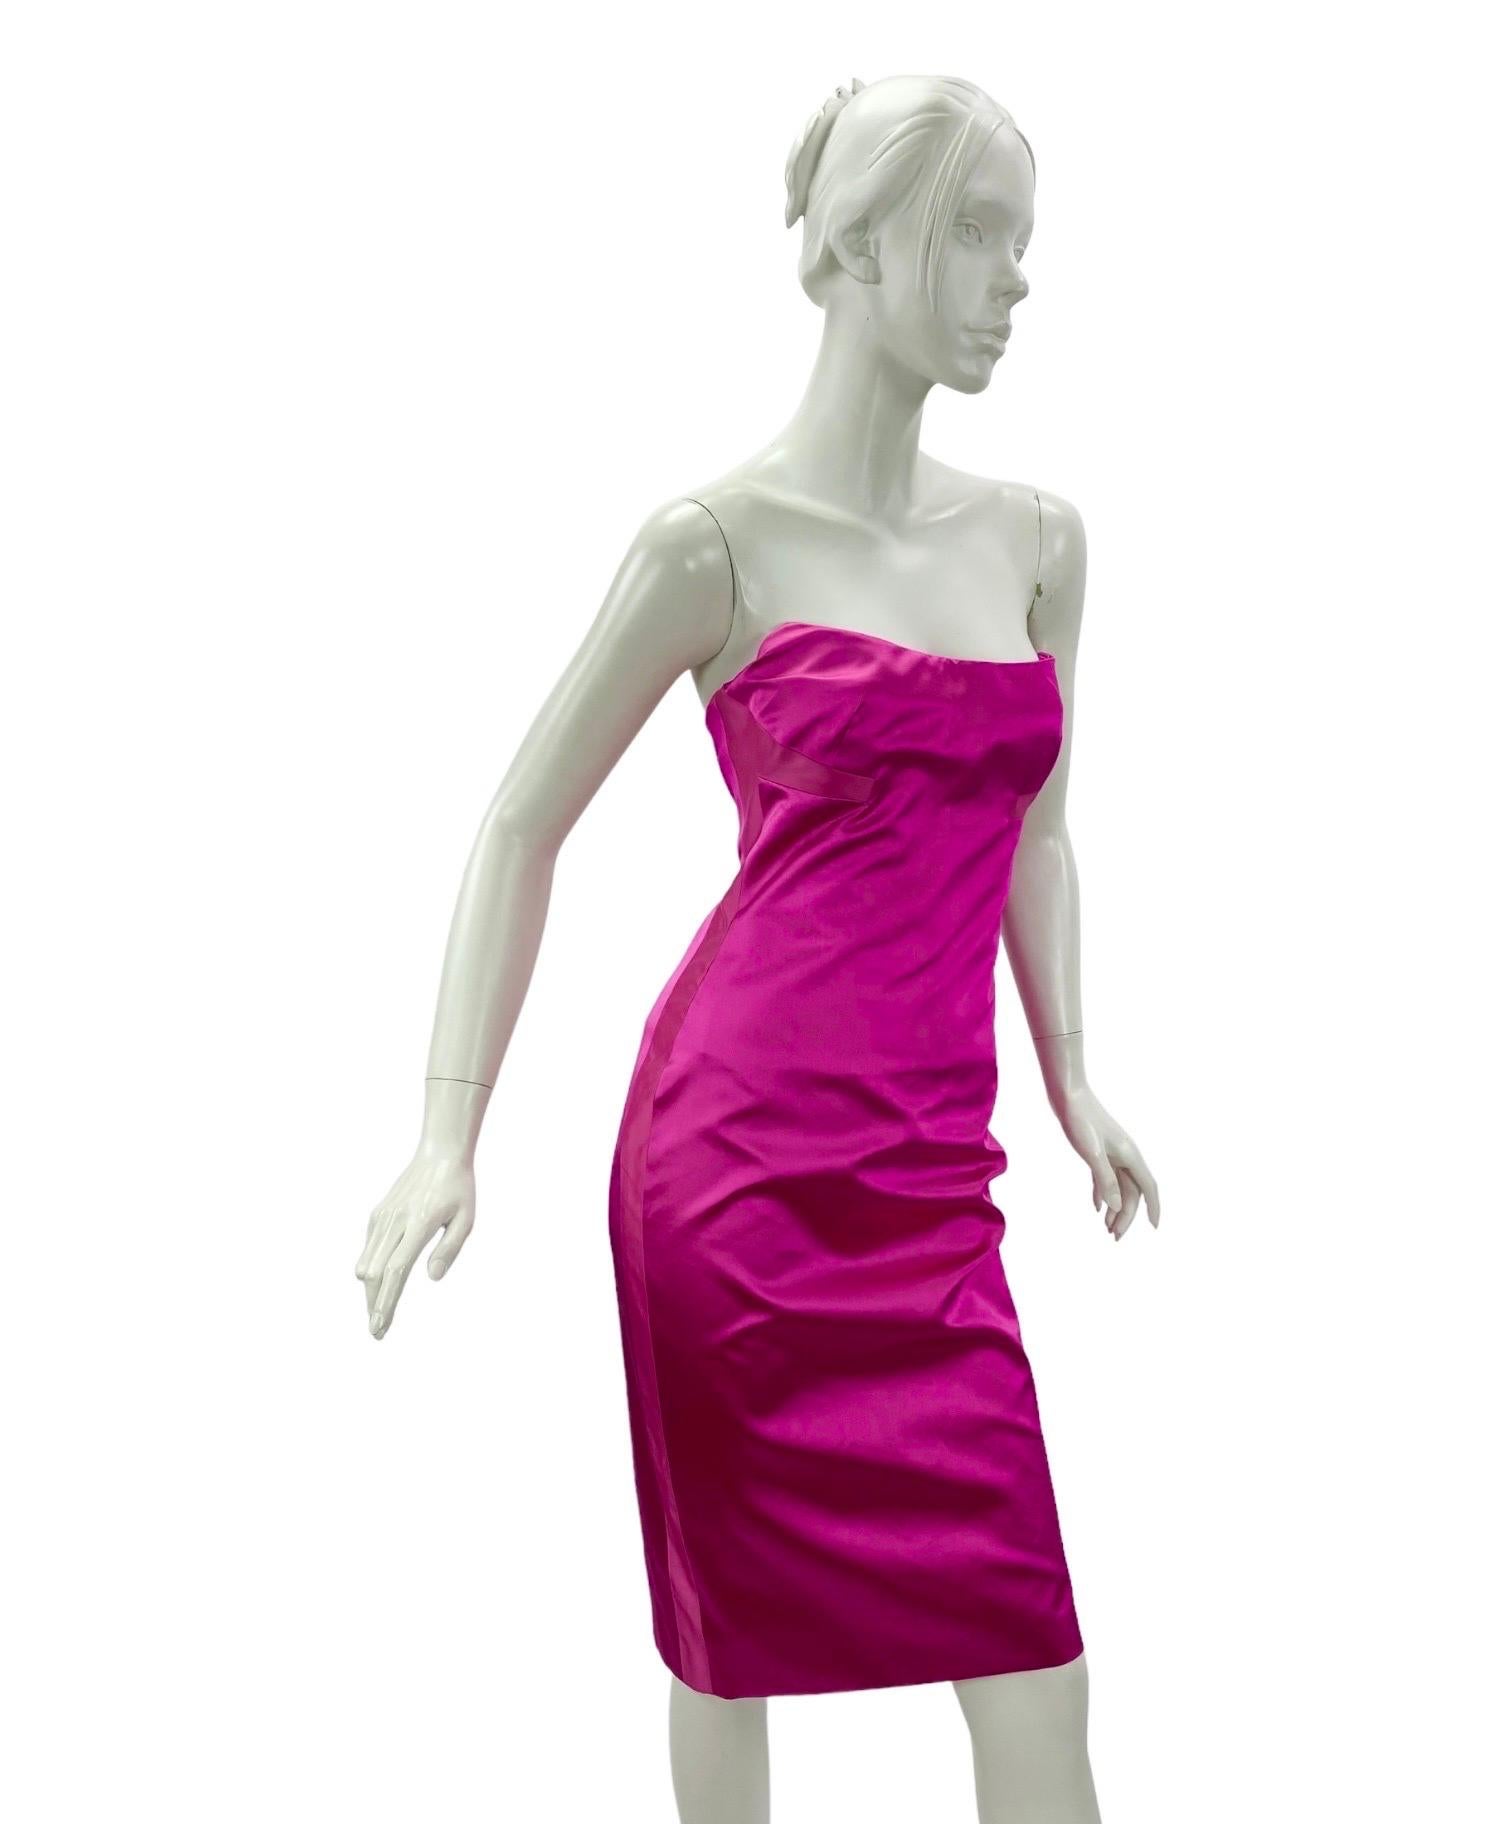 S/S 2001 Vintage Tom Ford for Gucci Hot Pink Strapless Dress.
Inner corset, fully lined, 100% silk.
IT Size 40 - US 4
Made in Italy.
Excellent condition.